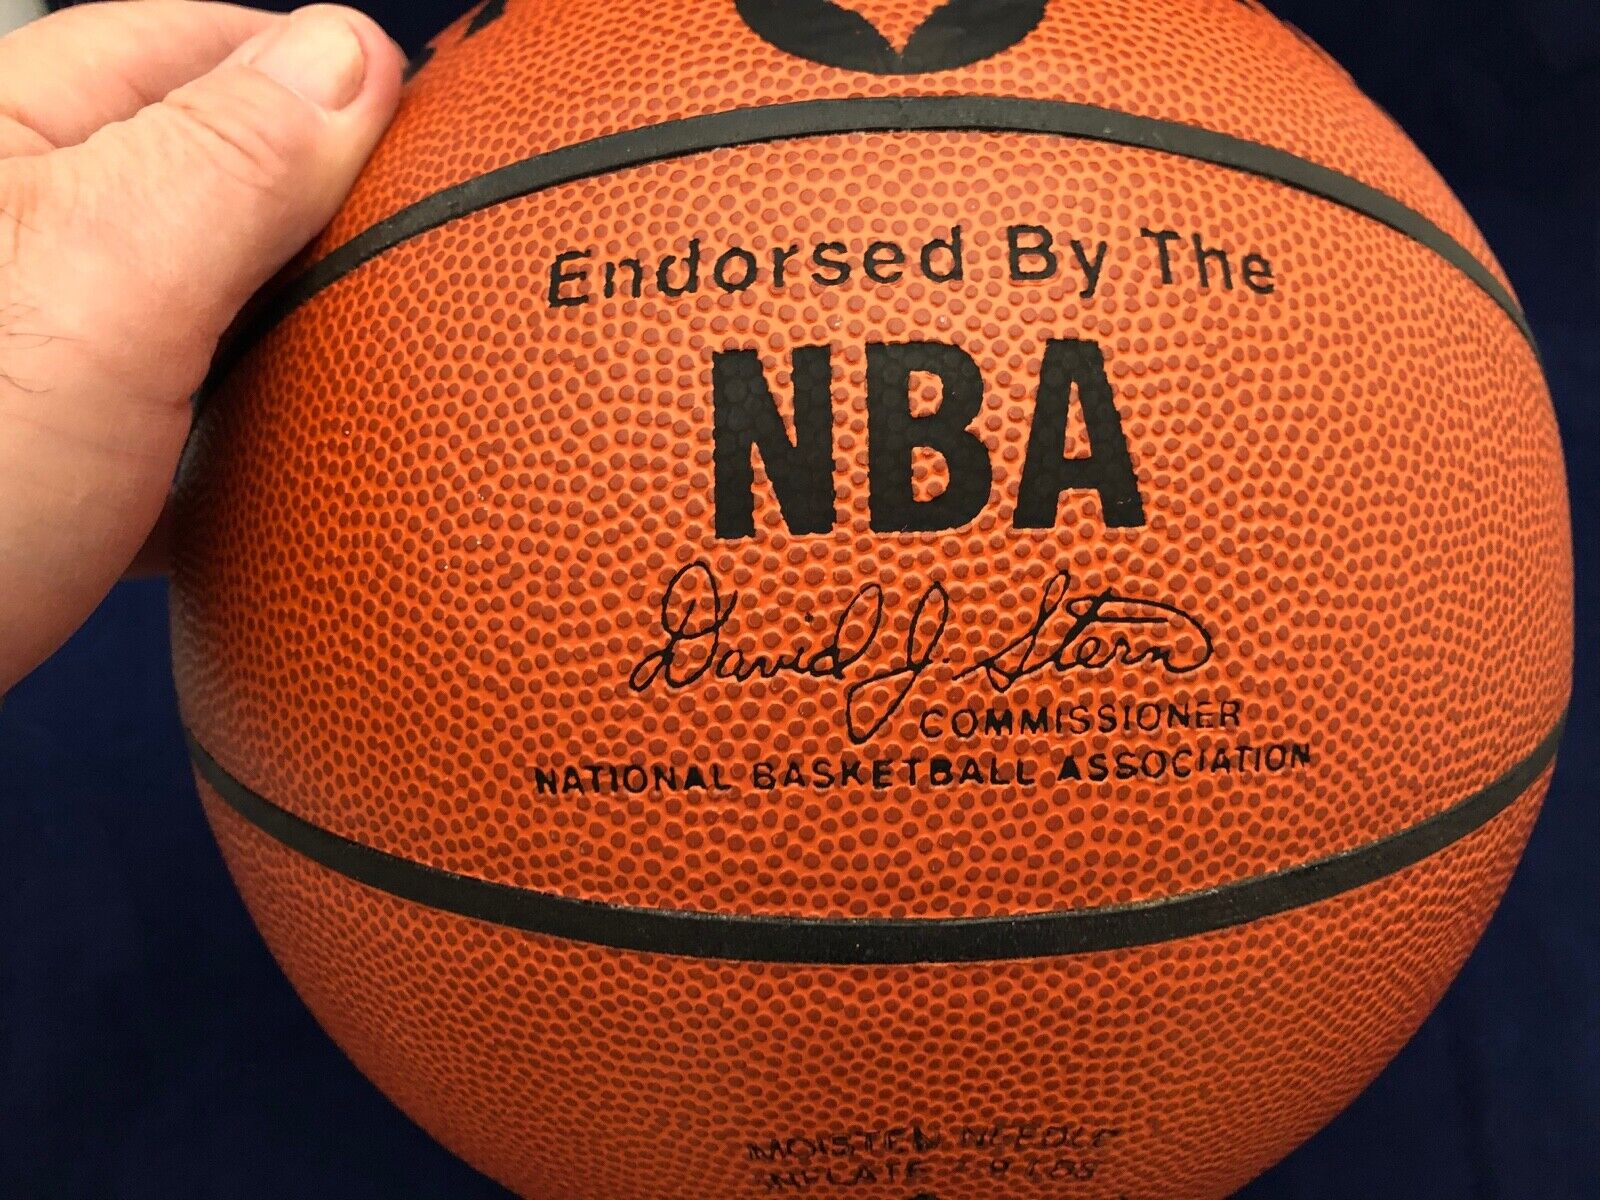 Satch Sanders autographed White Panel basketball Spalding